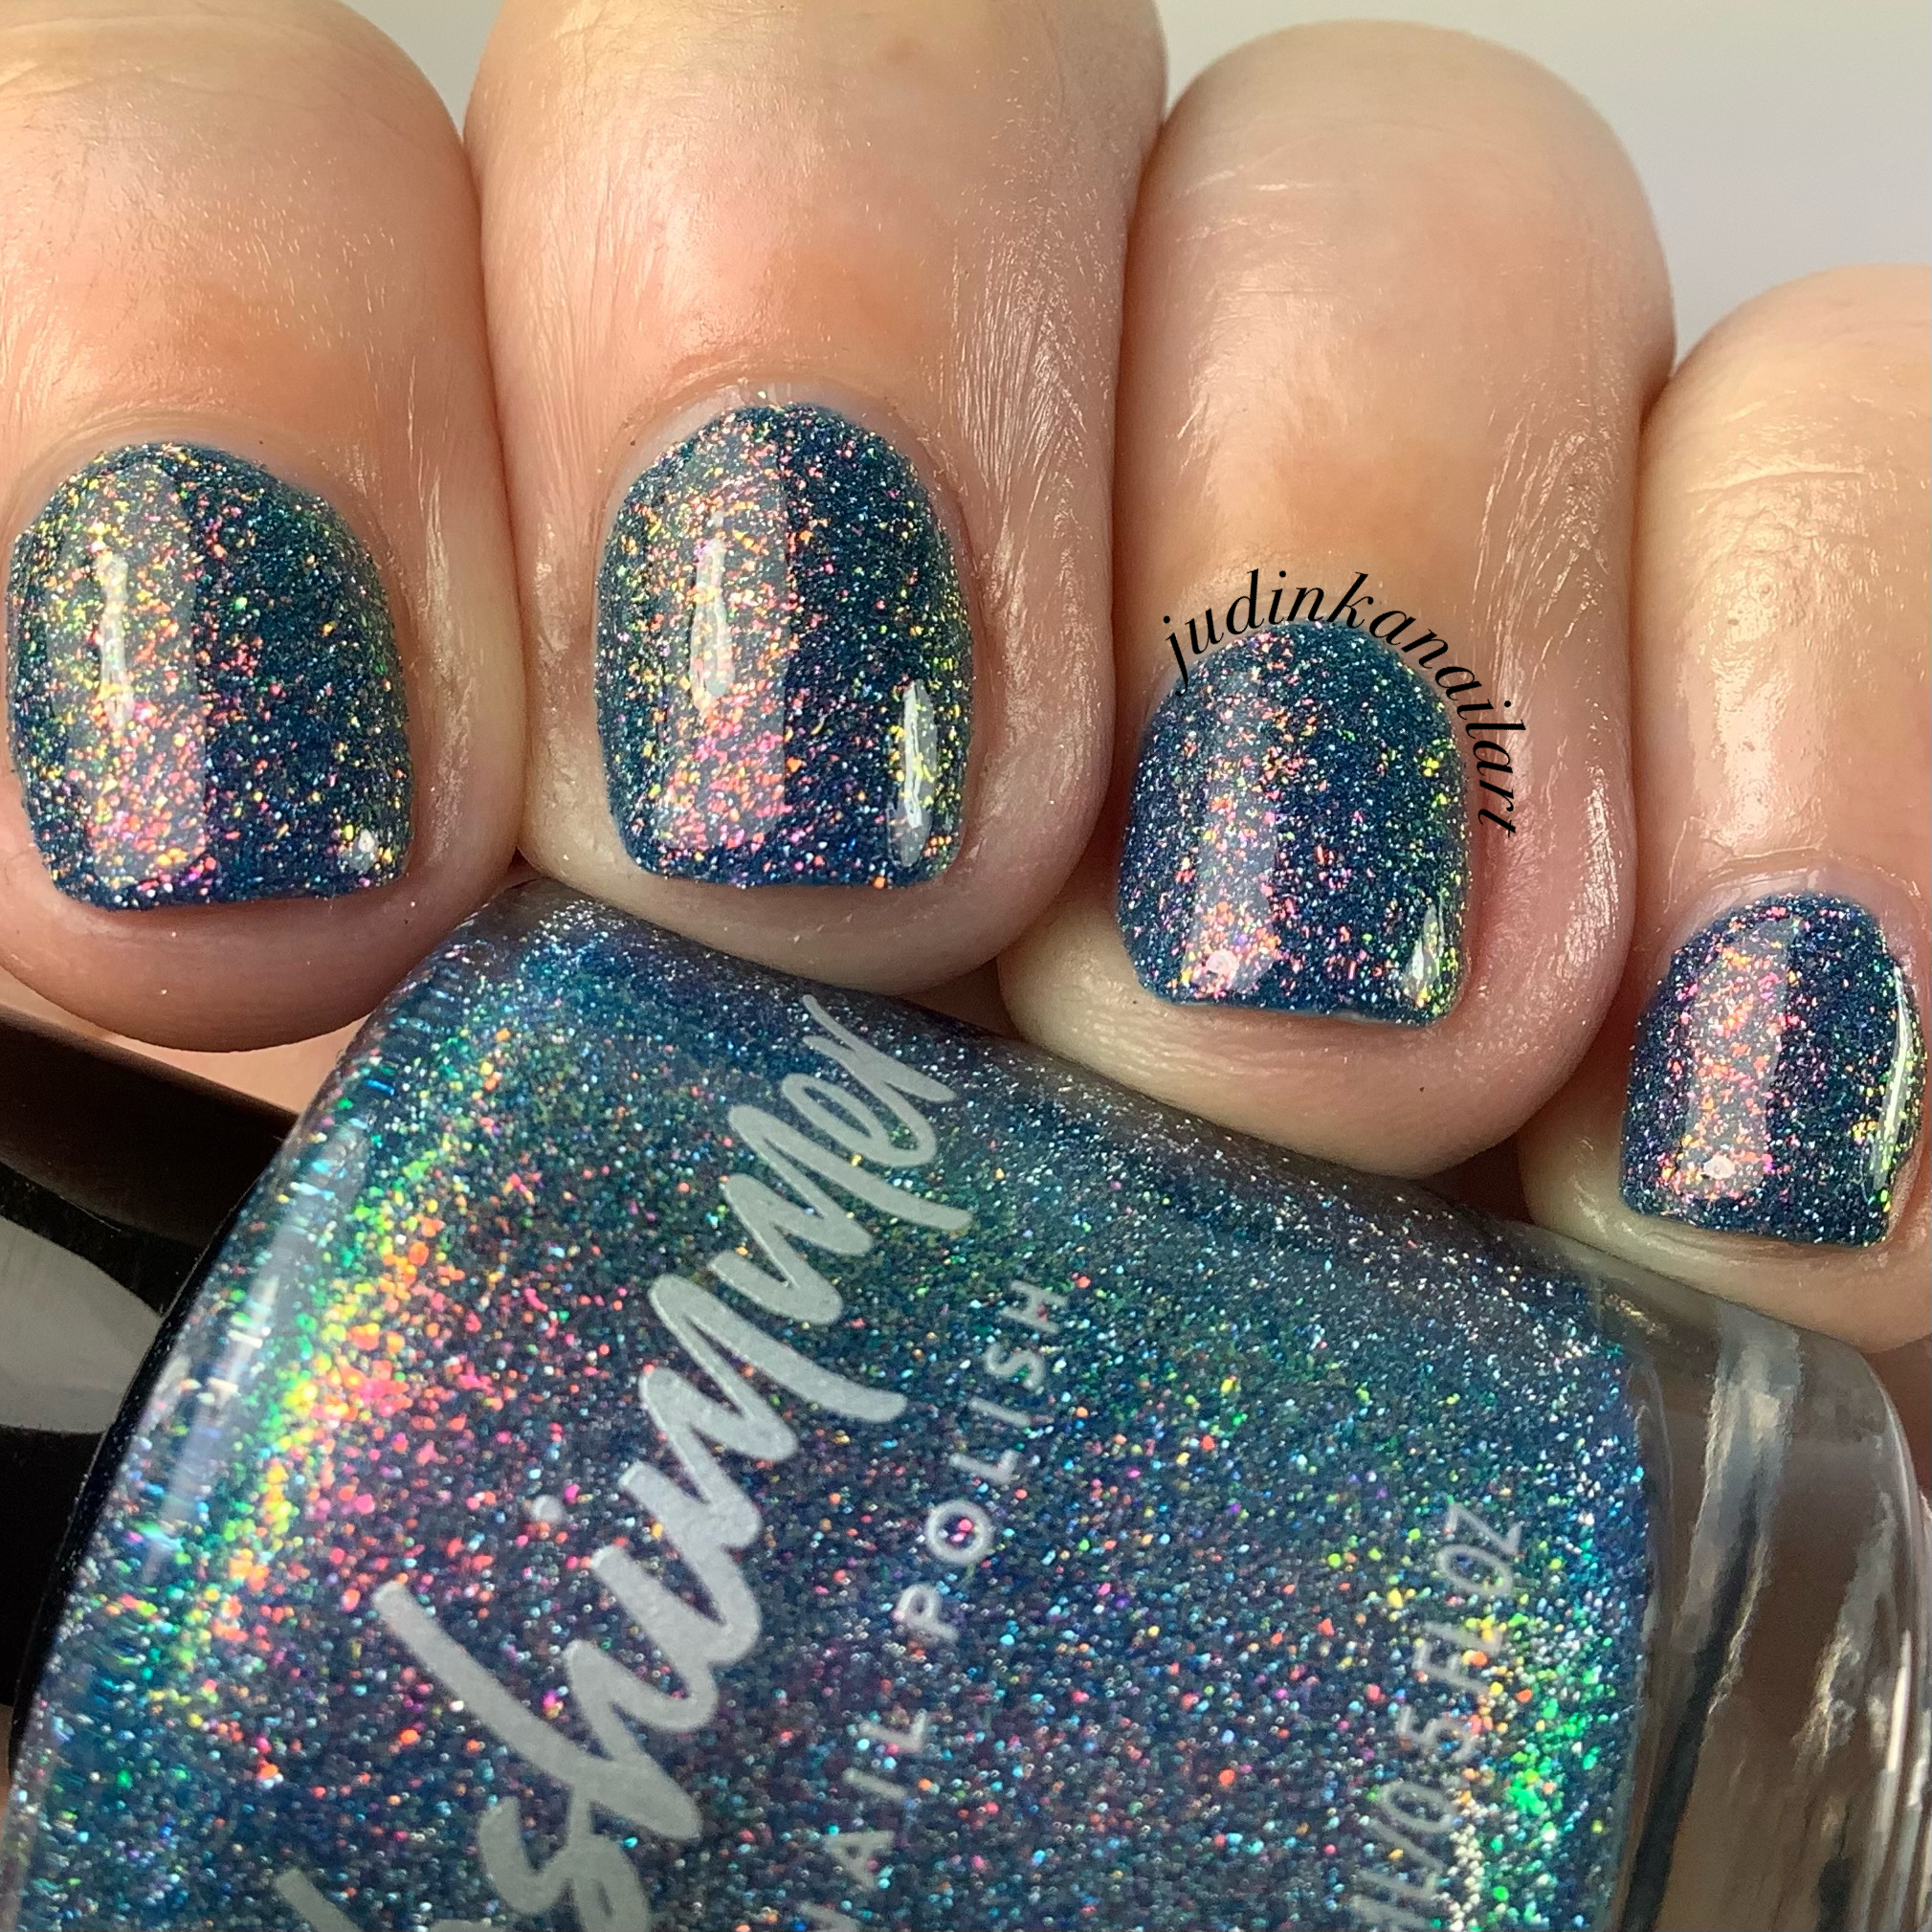 Chill Out Reflective Nail Polish By KBShimmer